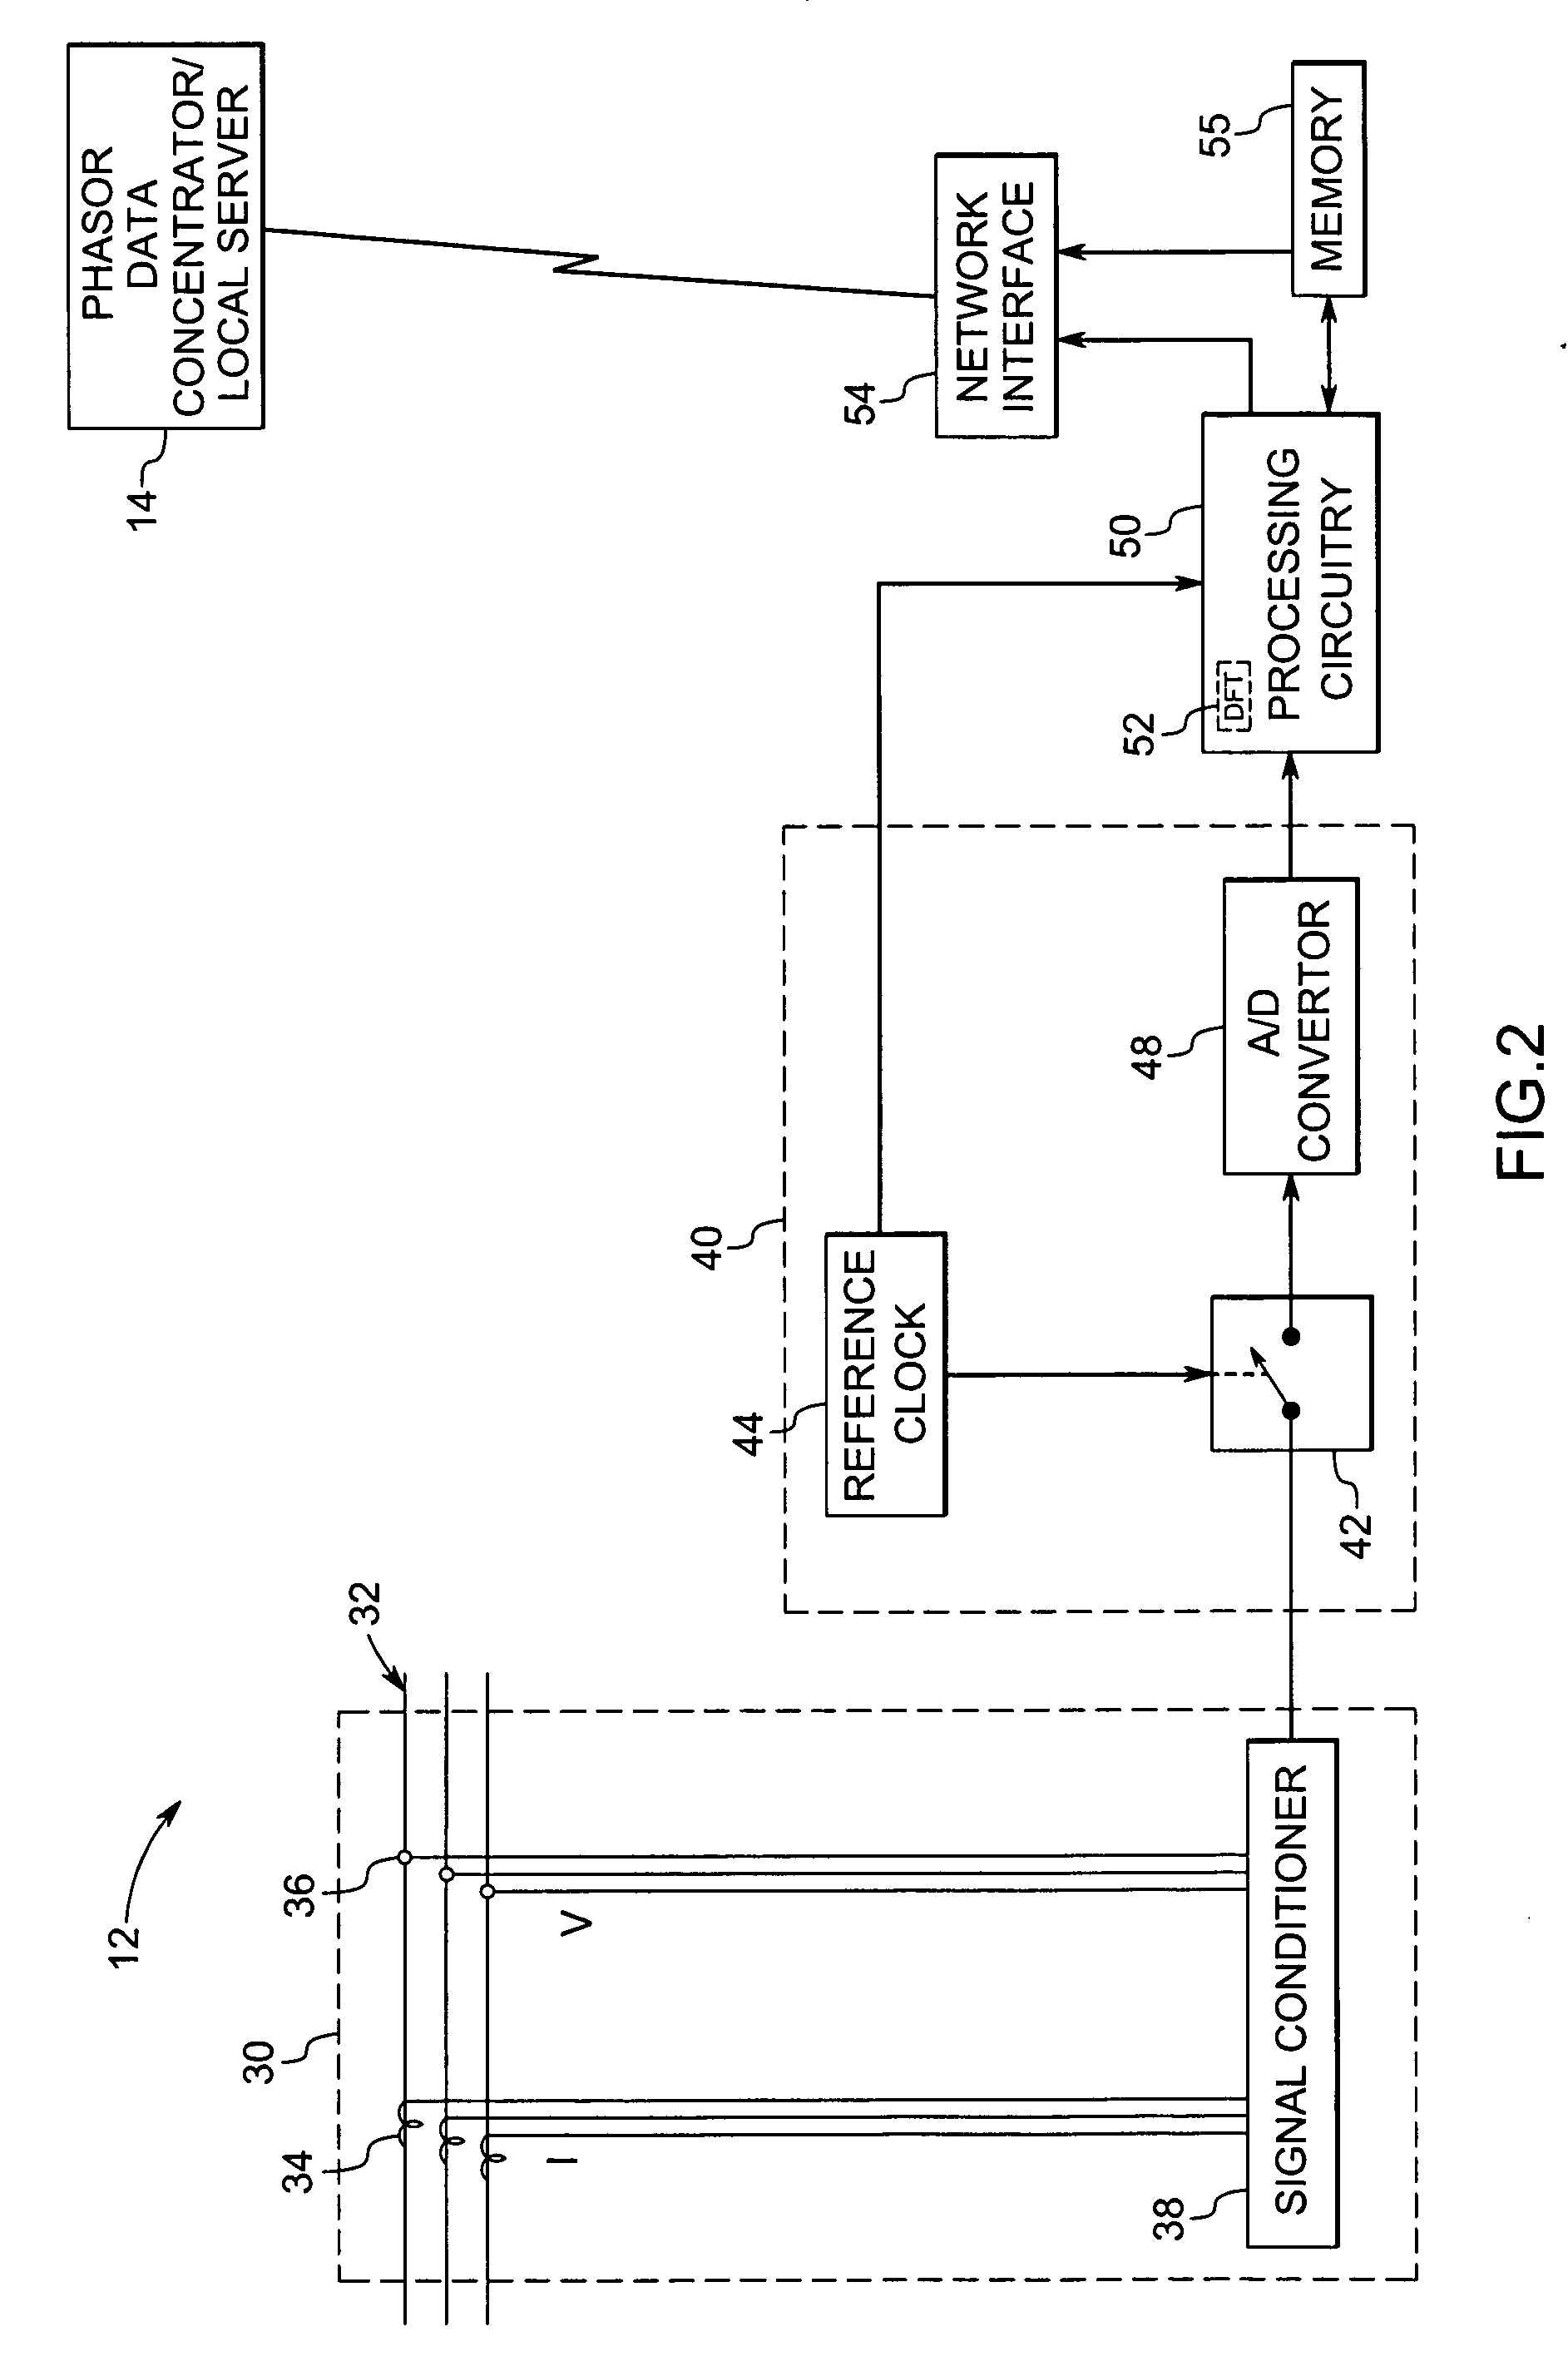 System and method for synchronized phasor measurement